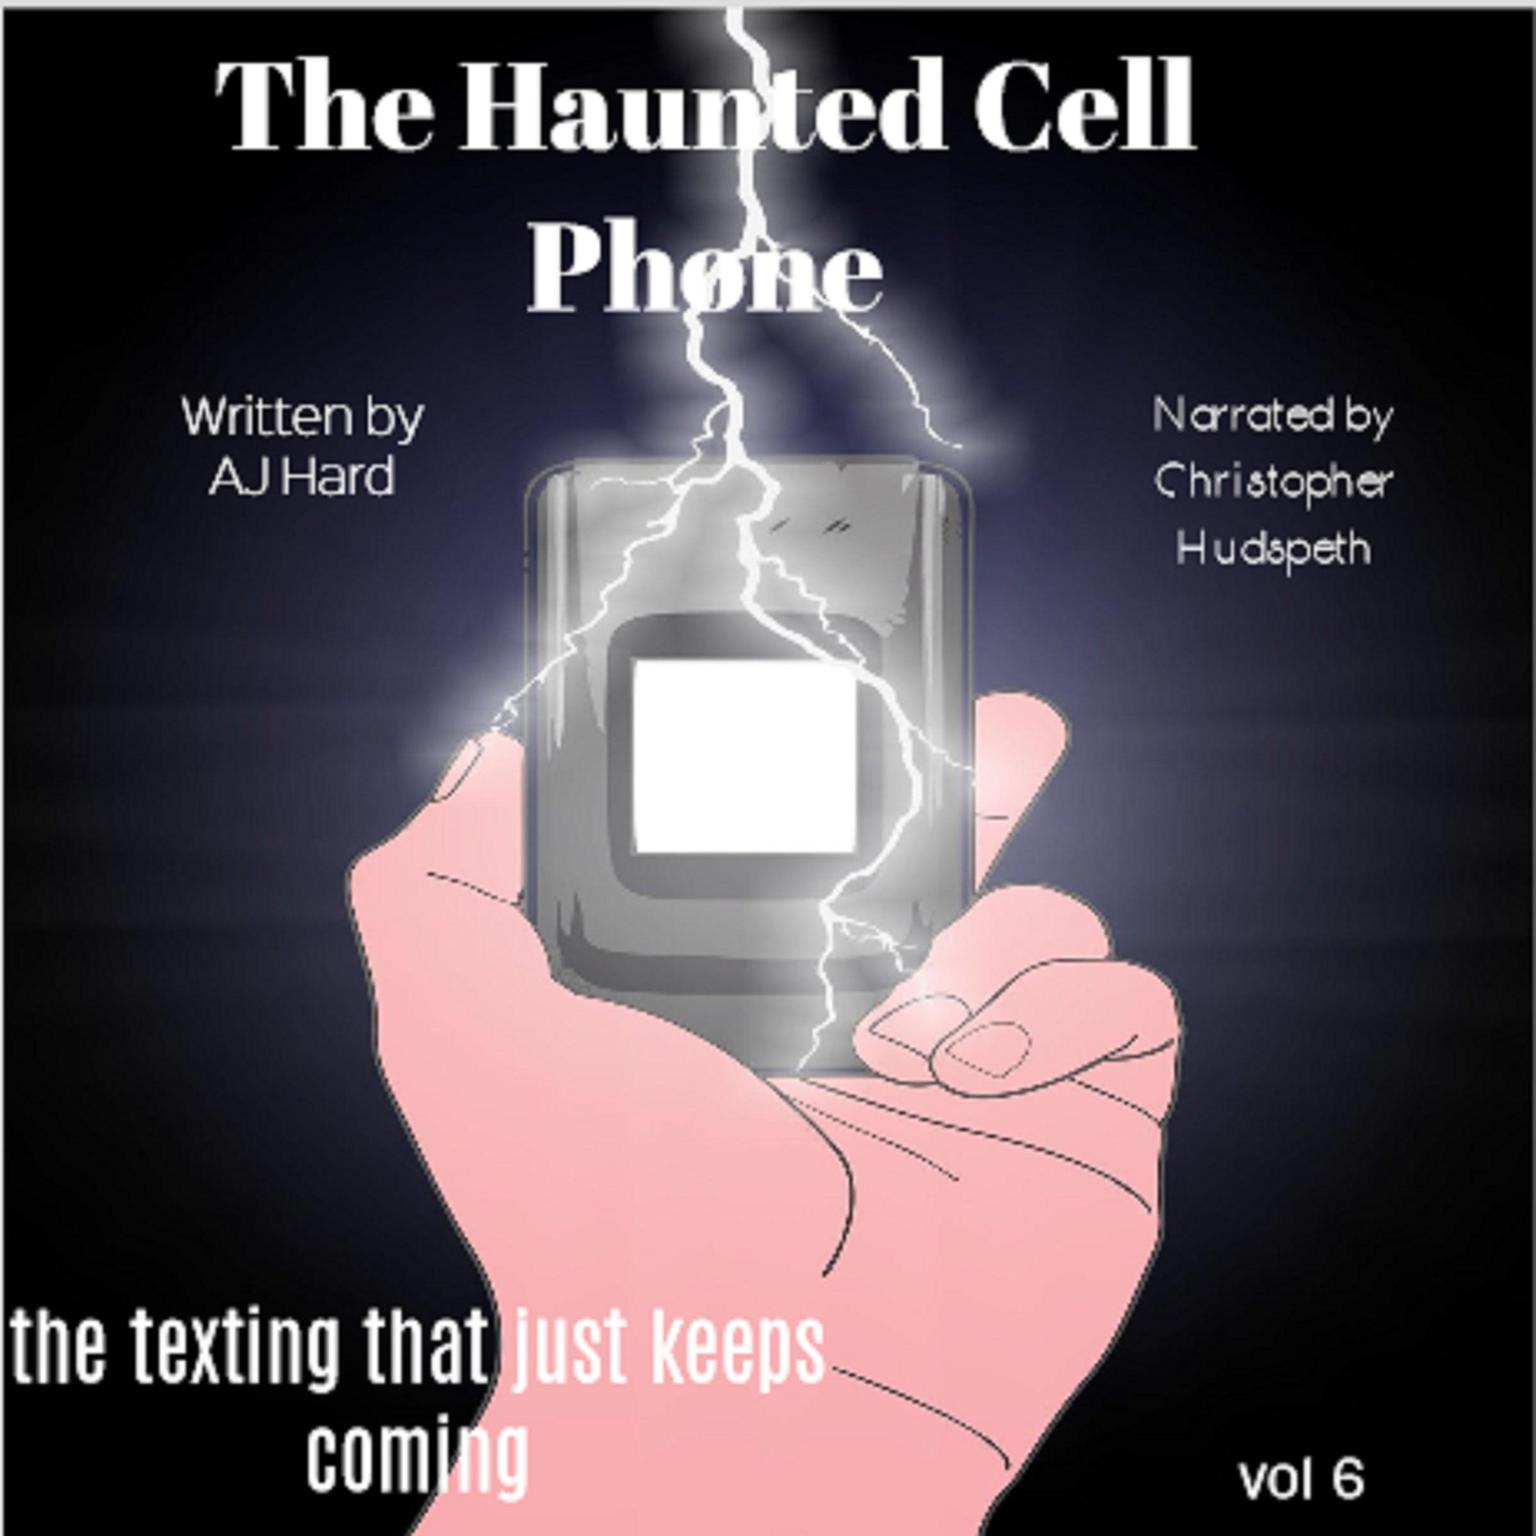 The Haunted Cell Phone: (Abridged): the texting that just keeps coming  Audiobook, by AJ Hard